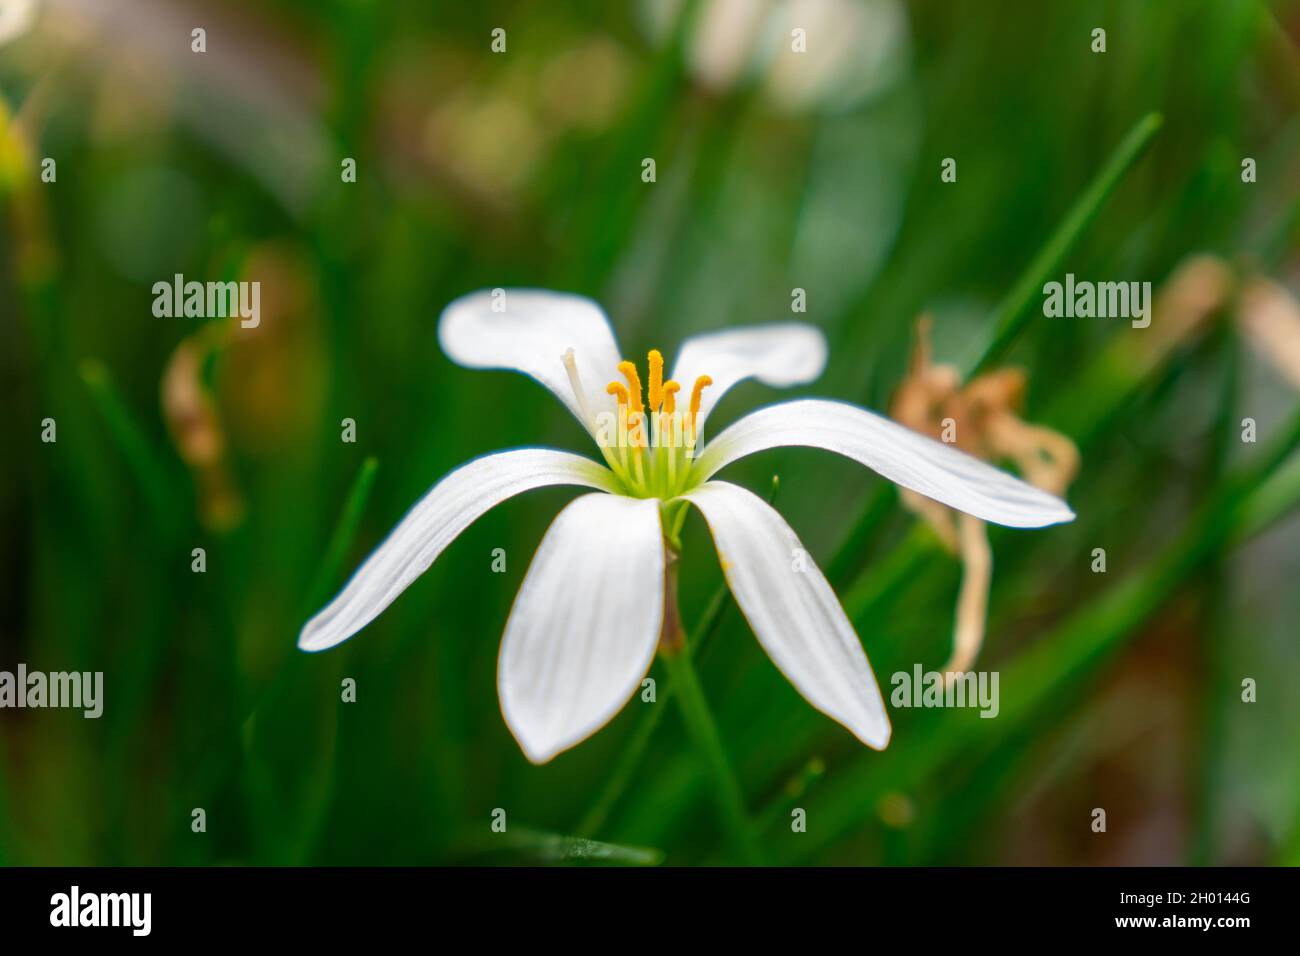 Focus on nature white flower and green grass Stock Photo